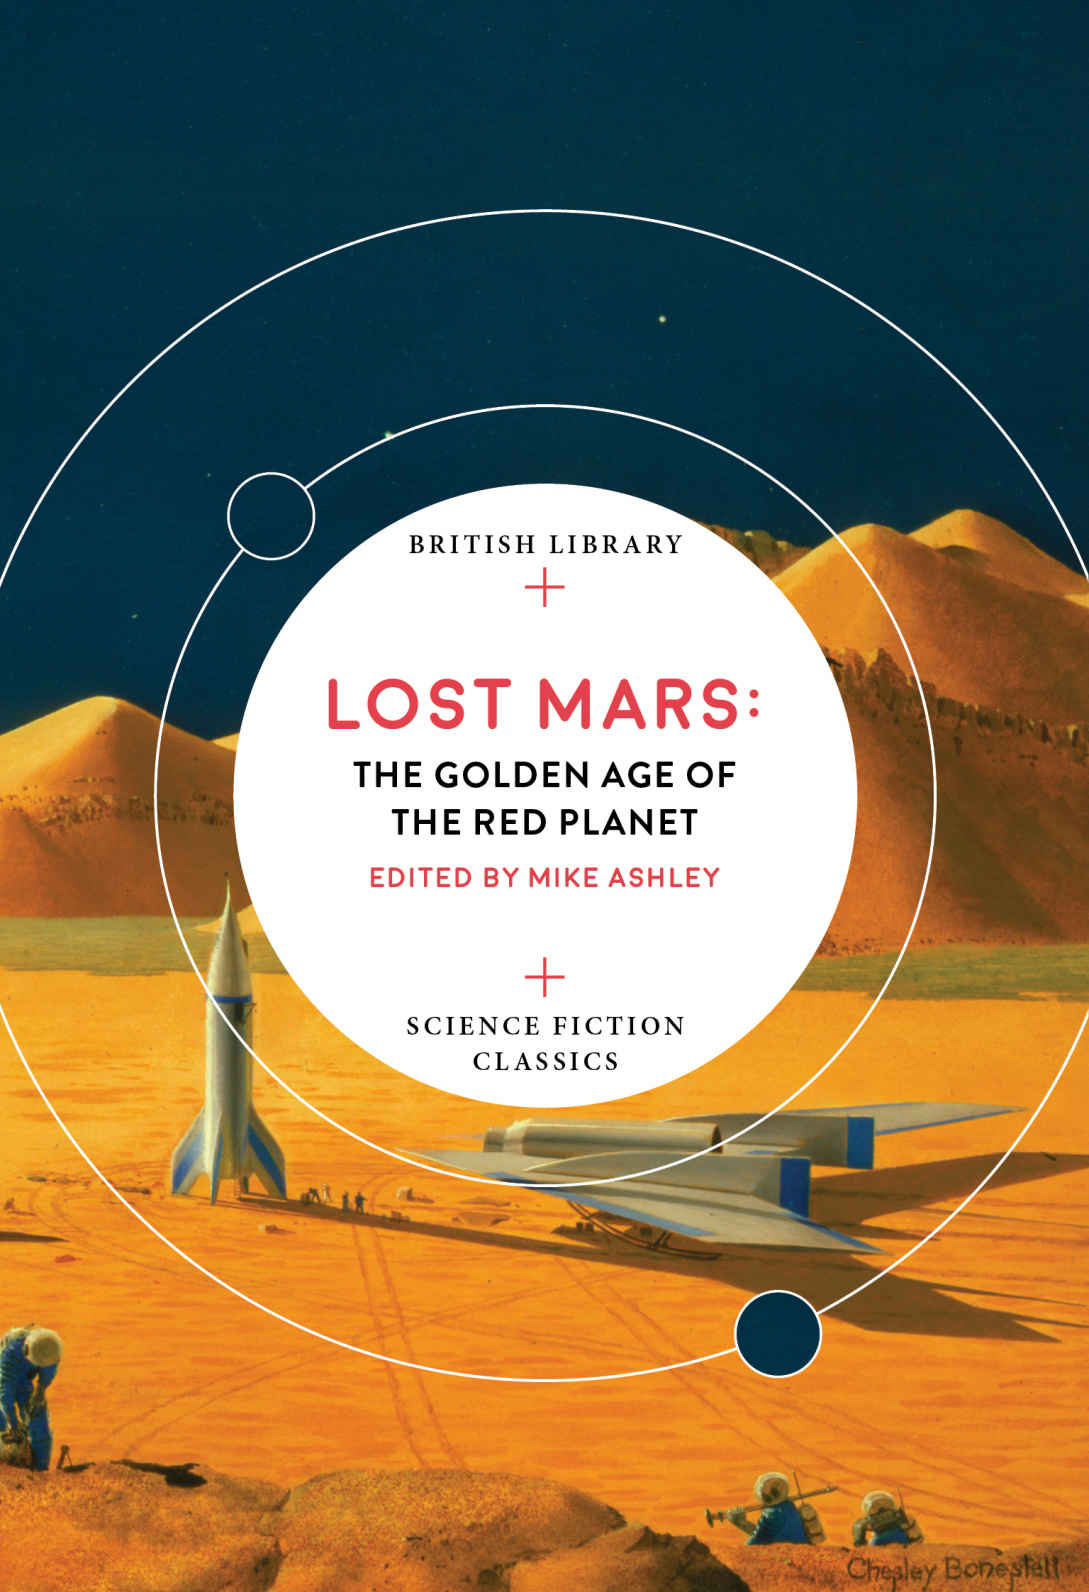 Lost Mars by Mike Ashley